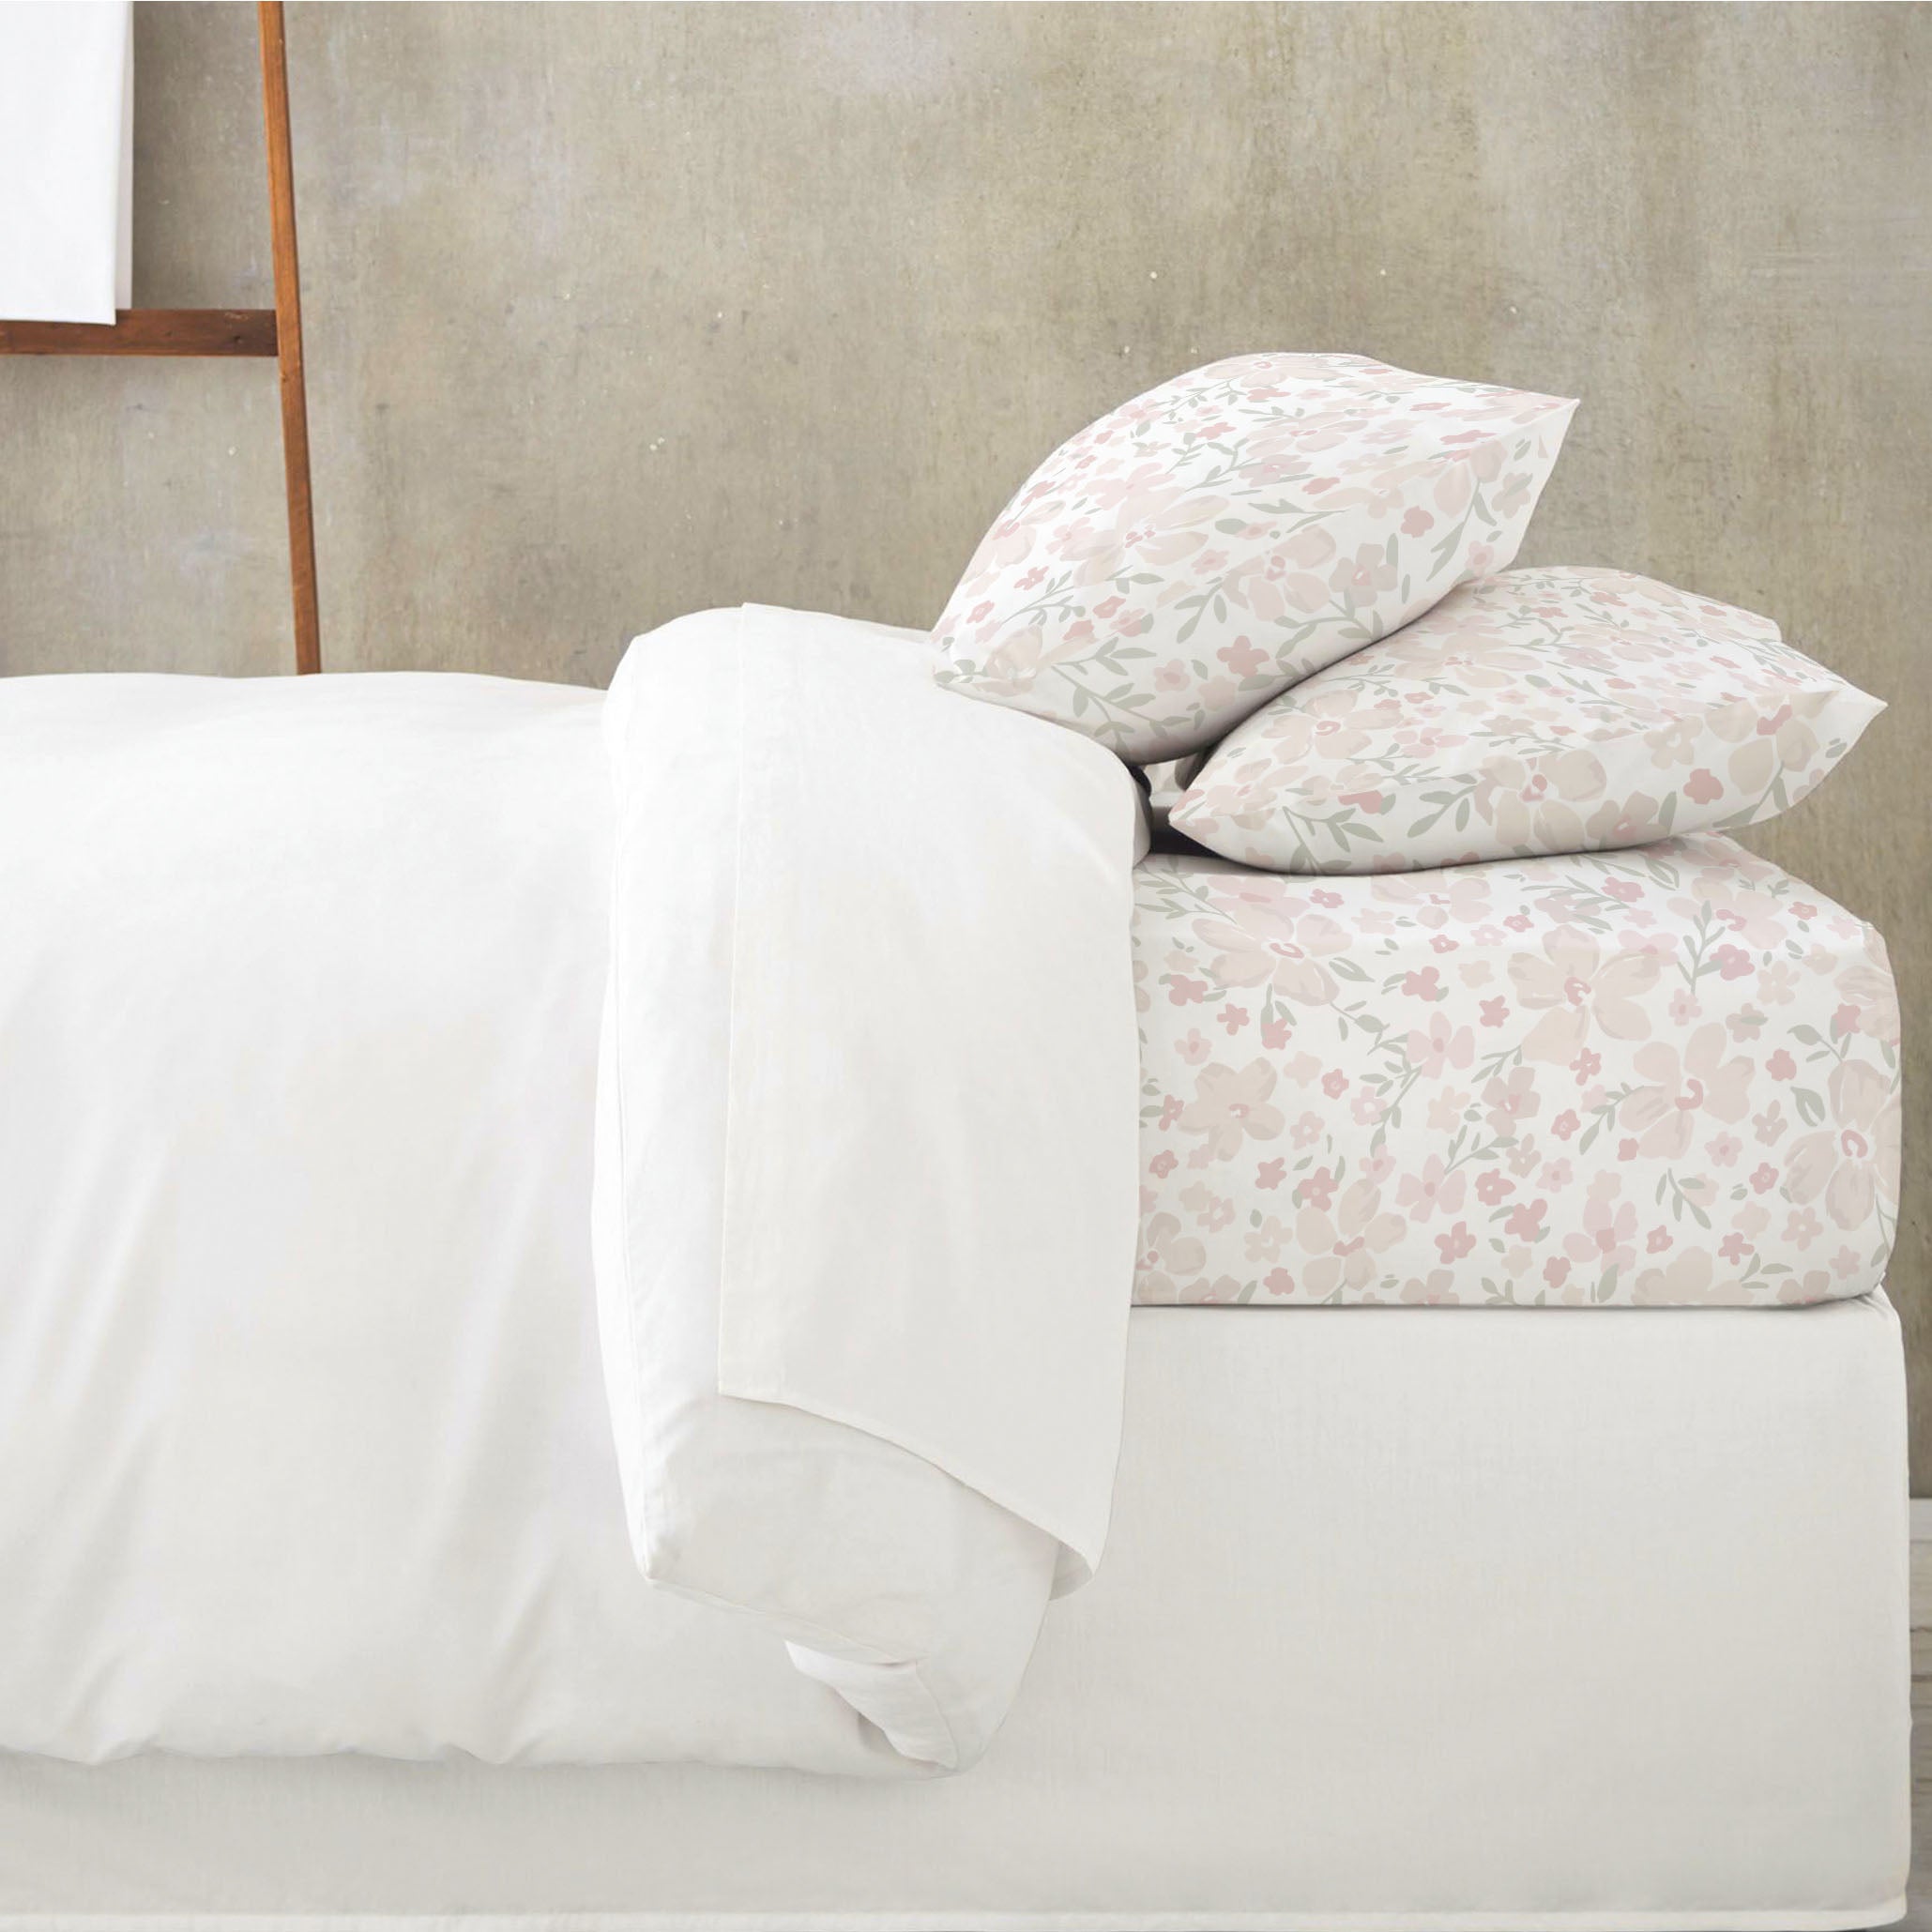 A neatly made bed with an Organic Cotton Fitted Sheet Set - Blossom from Makemake Organics against a gray concrete wall. Two pillows have a subtle floral pattern and the duvet is plain white.